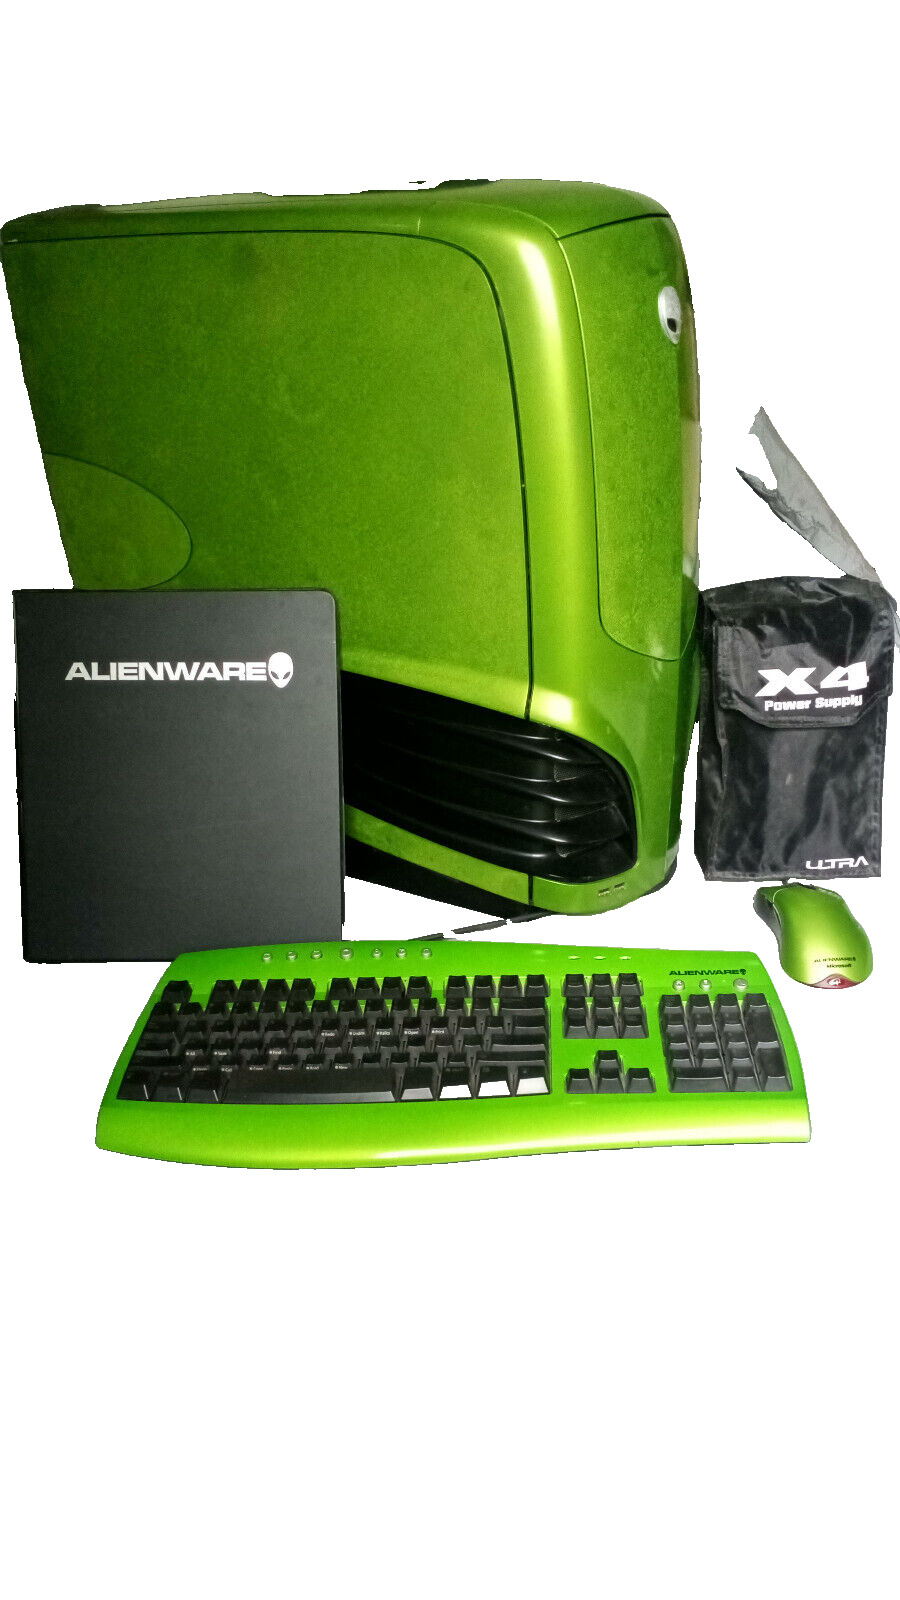 Pre Dell Alienware Area 51 Rare Cyborg Green. Mouse and Keyboard. Working.